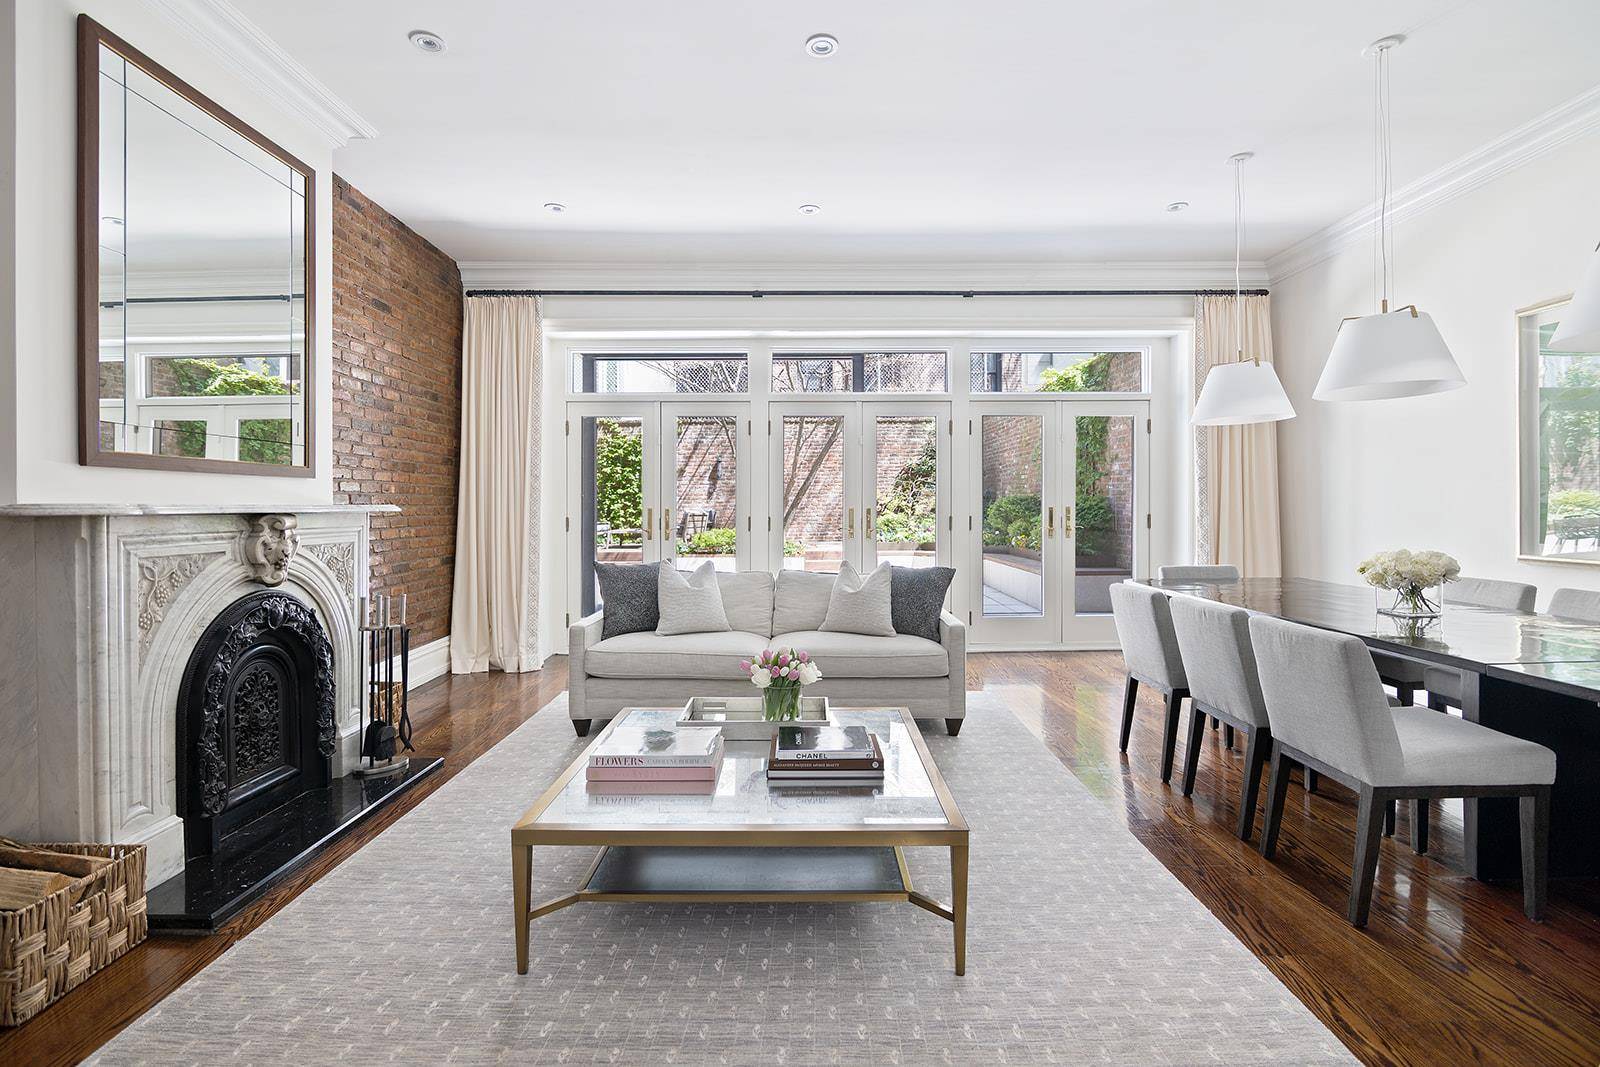 Located in a classic brownstone on a quiet, tree lined stretch of West 22nd Street, Residence 1 features one of the largest private gardens in West Chelsea.